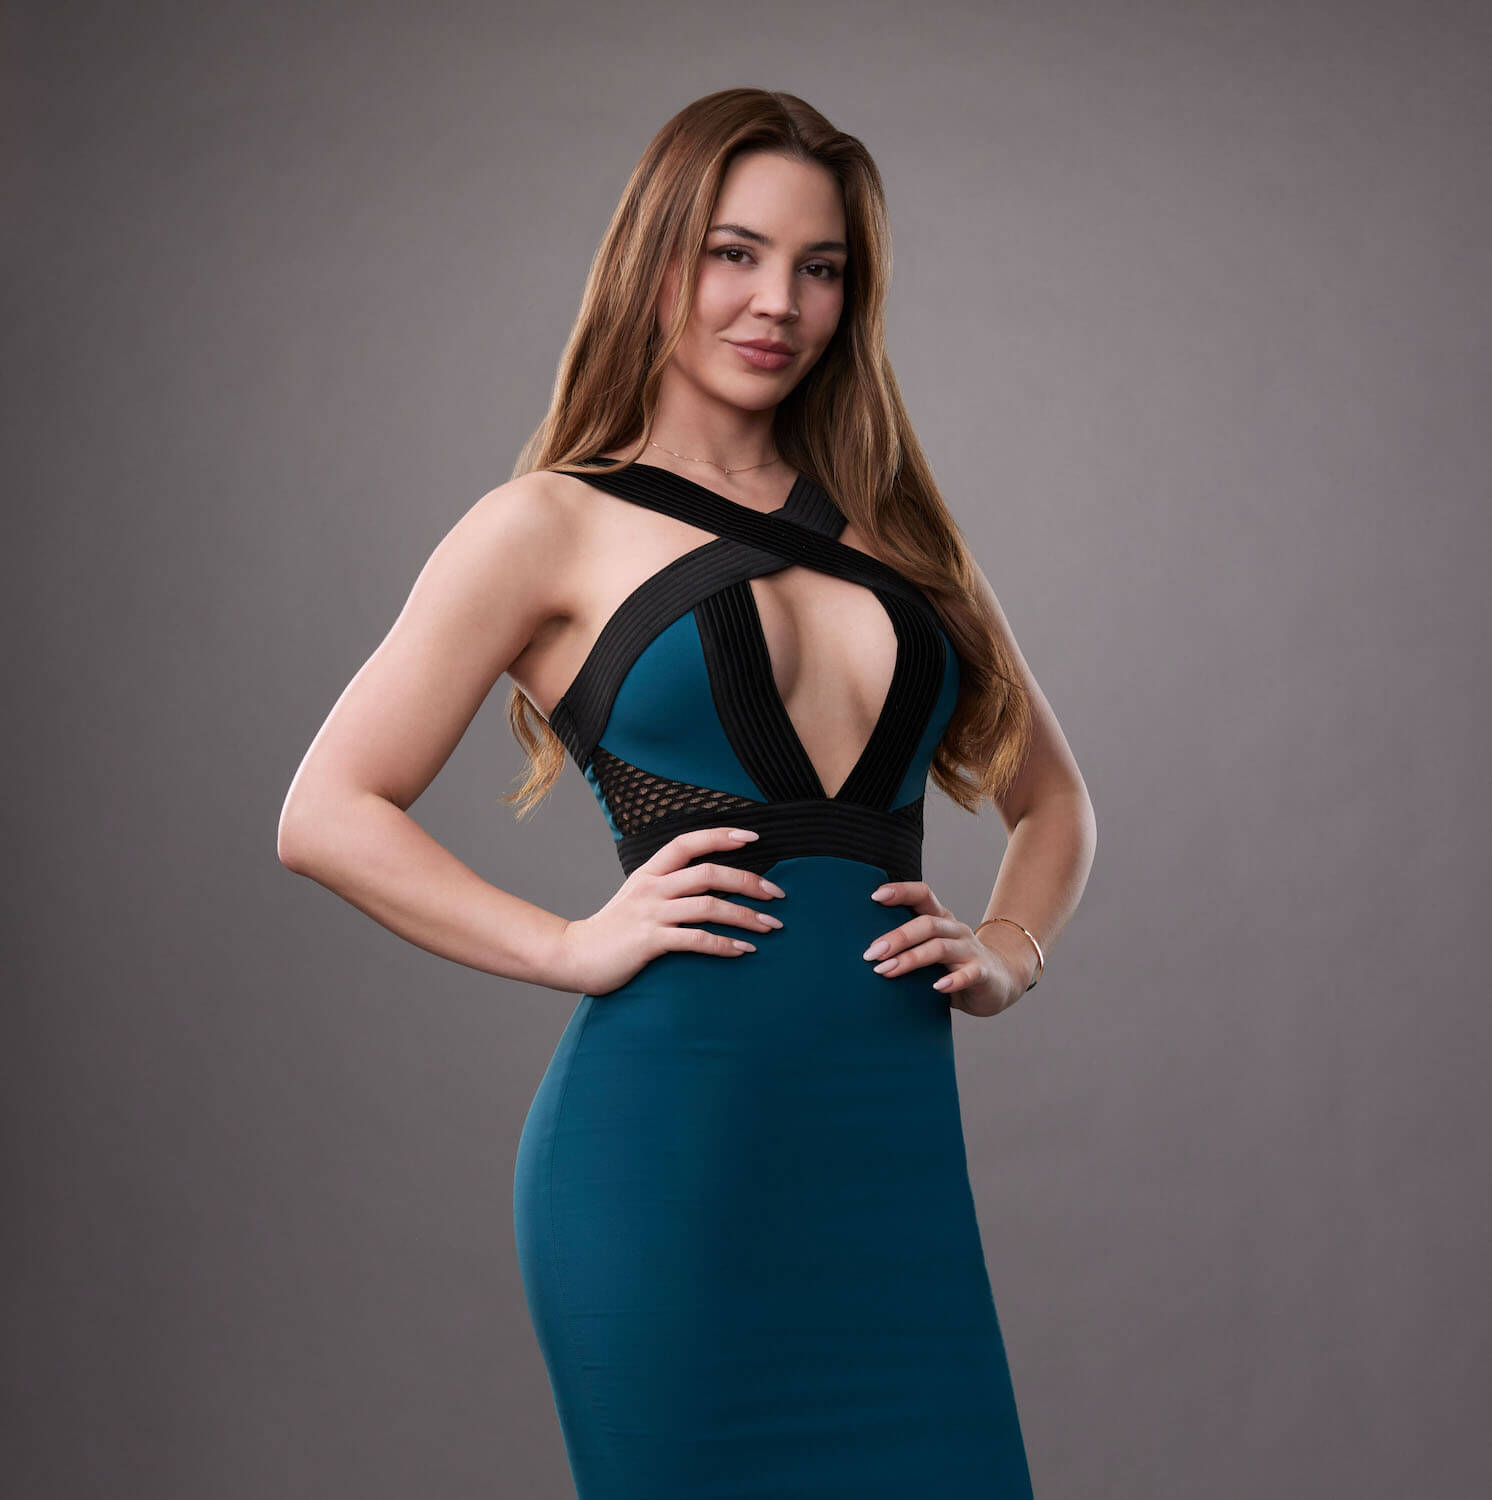 Anfisa Arkhipchenko from 'House of Villains' wearing a blue dress posing with her hands on her hips